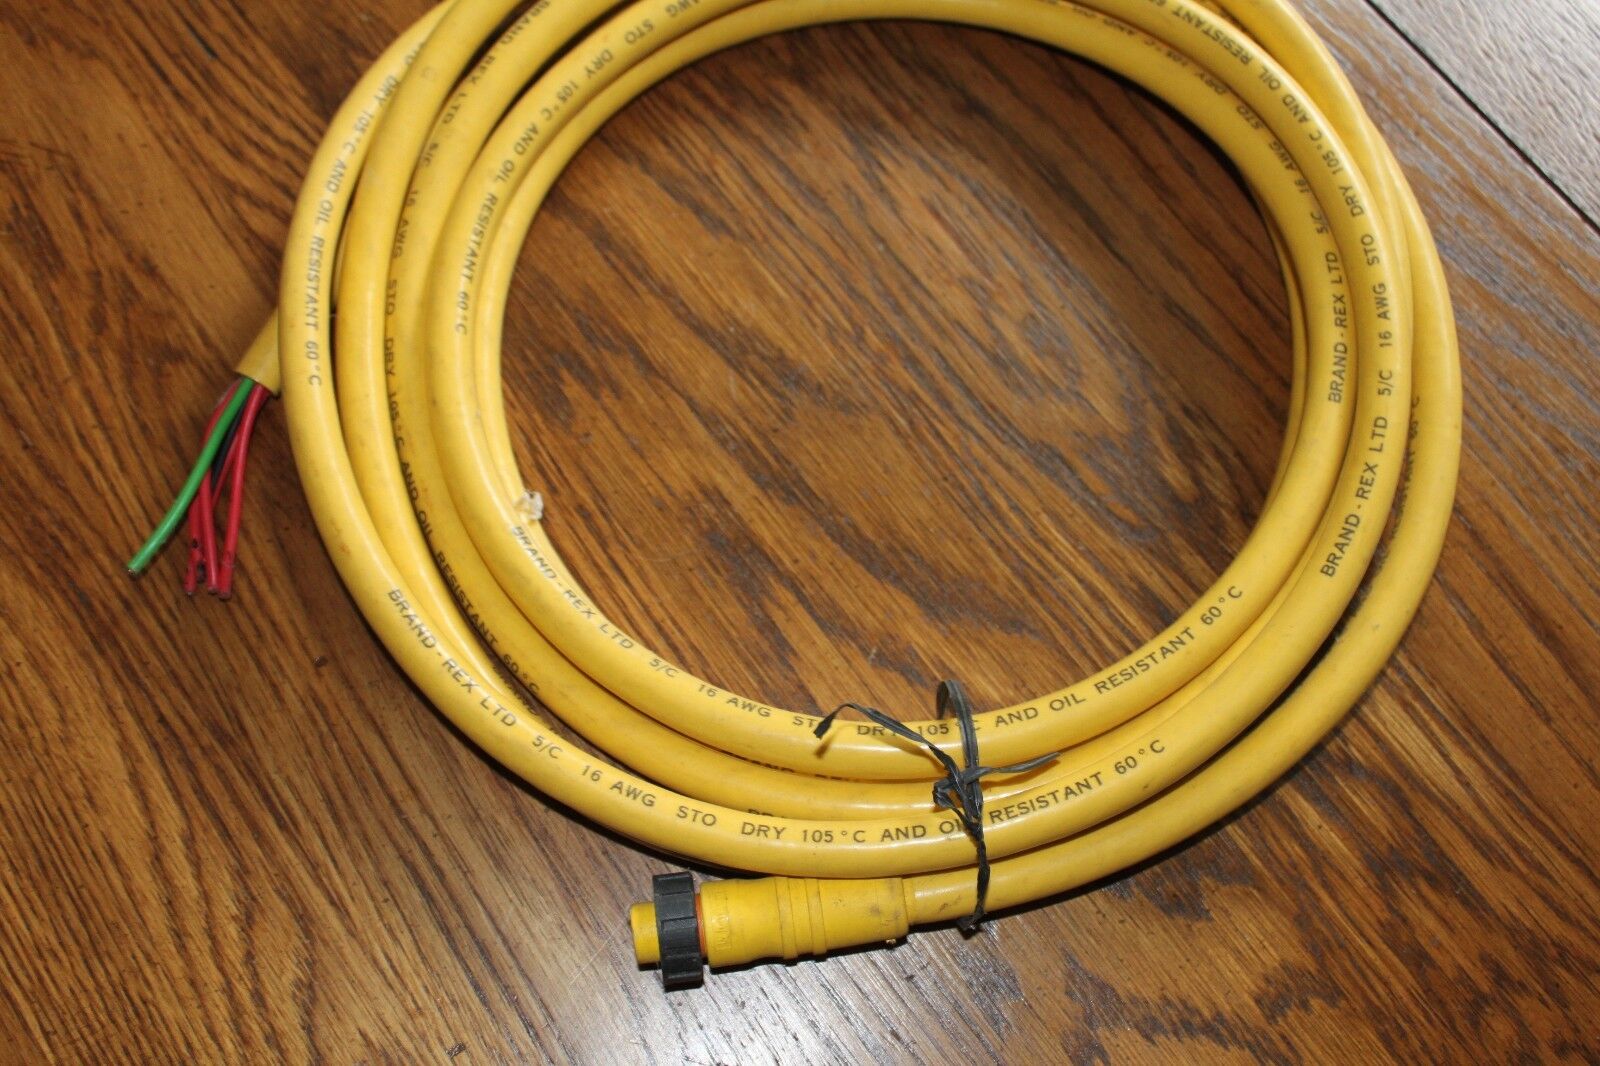 BRAND REX * 16 AWG CABLE * 5/C STO Dry 105*C and Oil Resistant 60*C. 16 ft. long